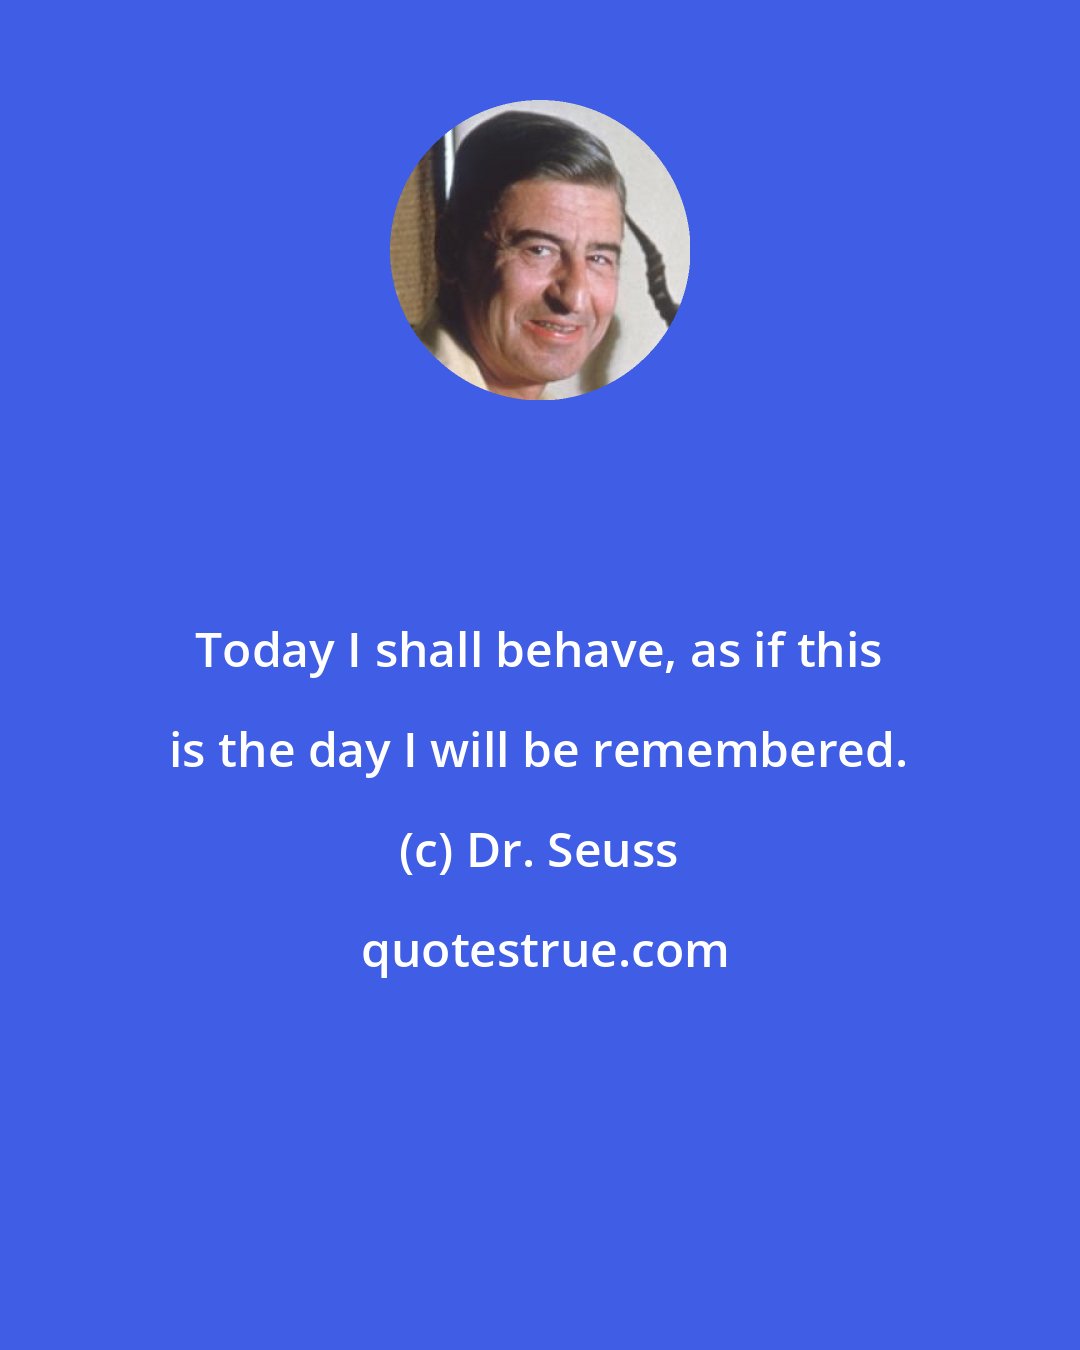 Dr. Seuss: Today I shall behave, as if this is the day I will be remembered.